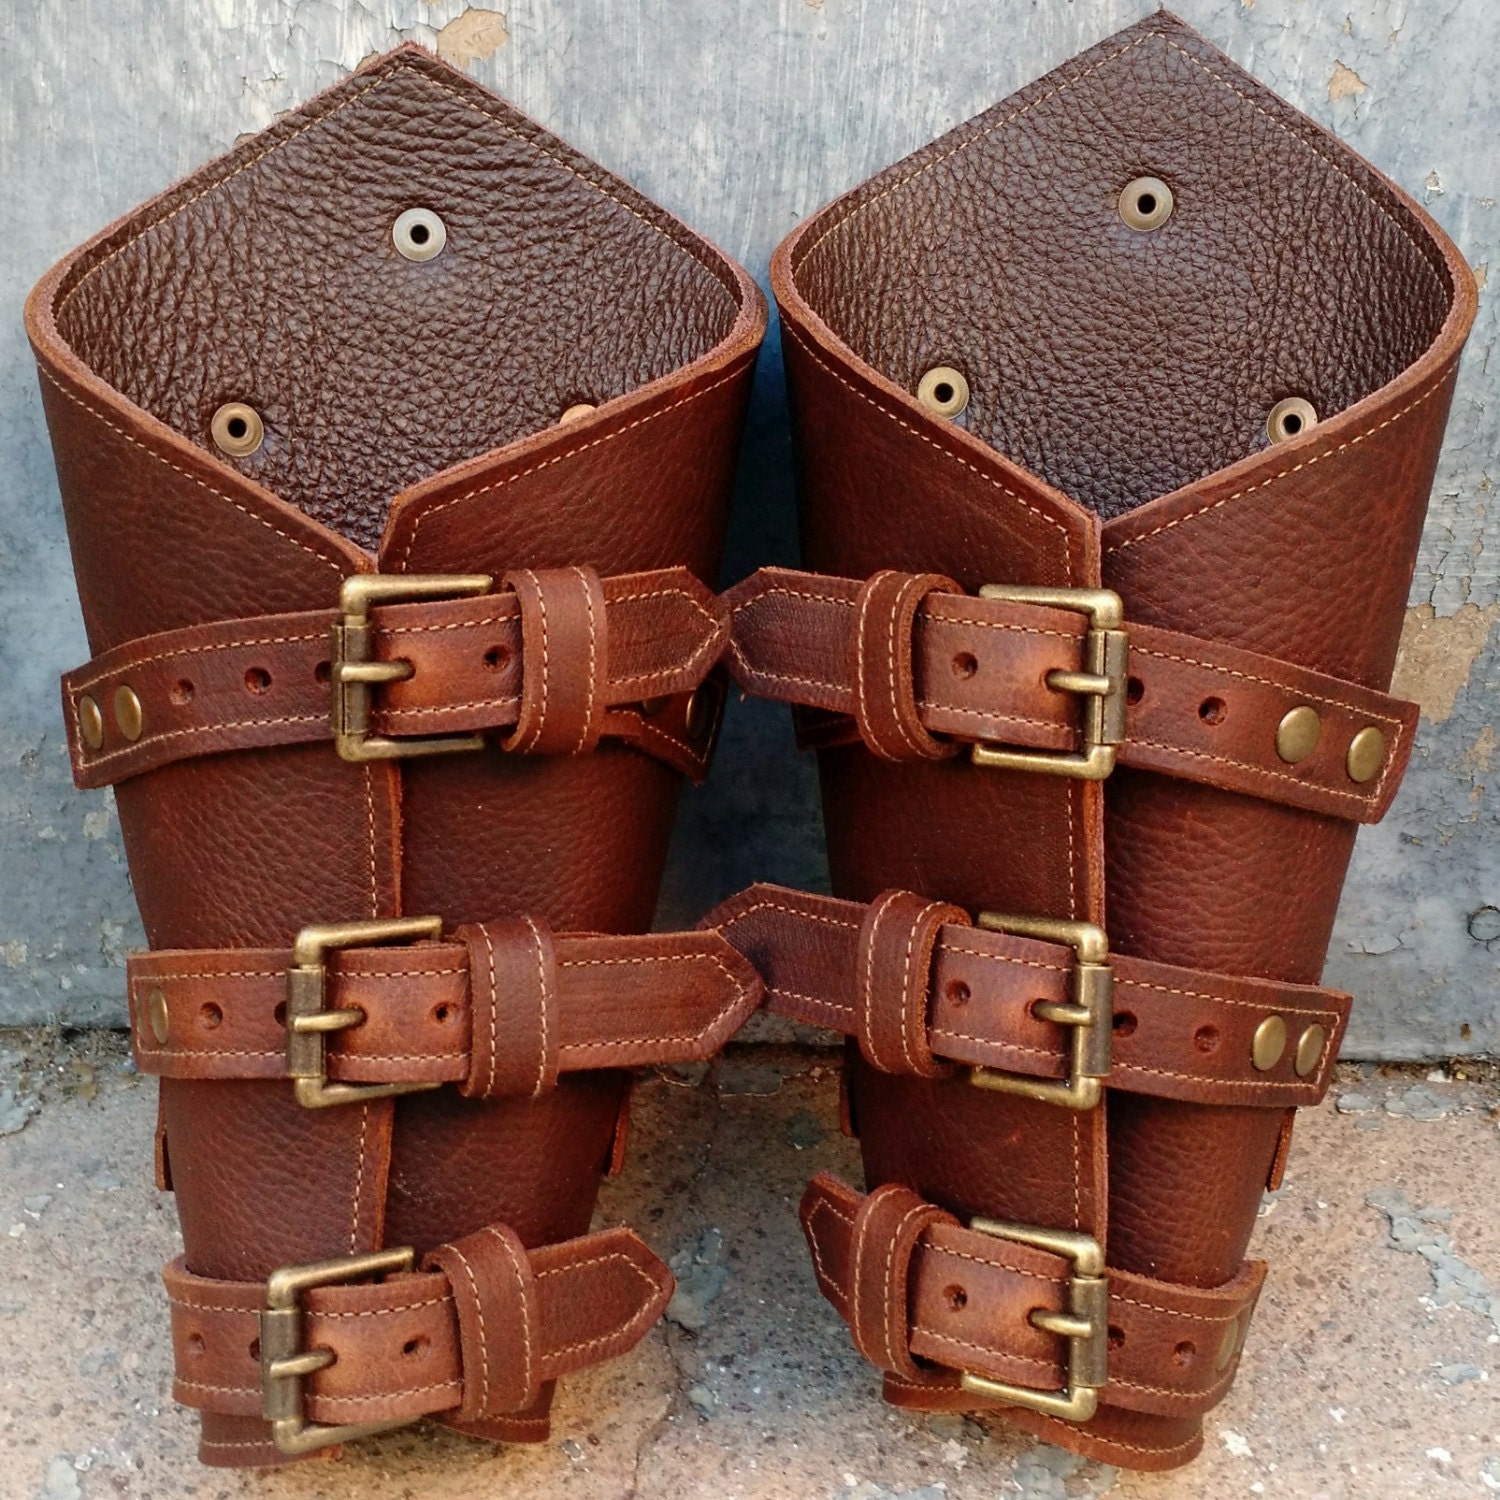 Oiled Brown Leather Peaked Bracers or Gauntlets with Antiqued